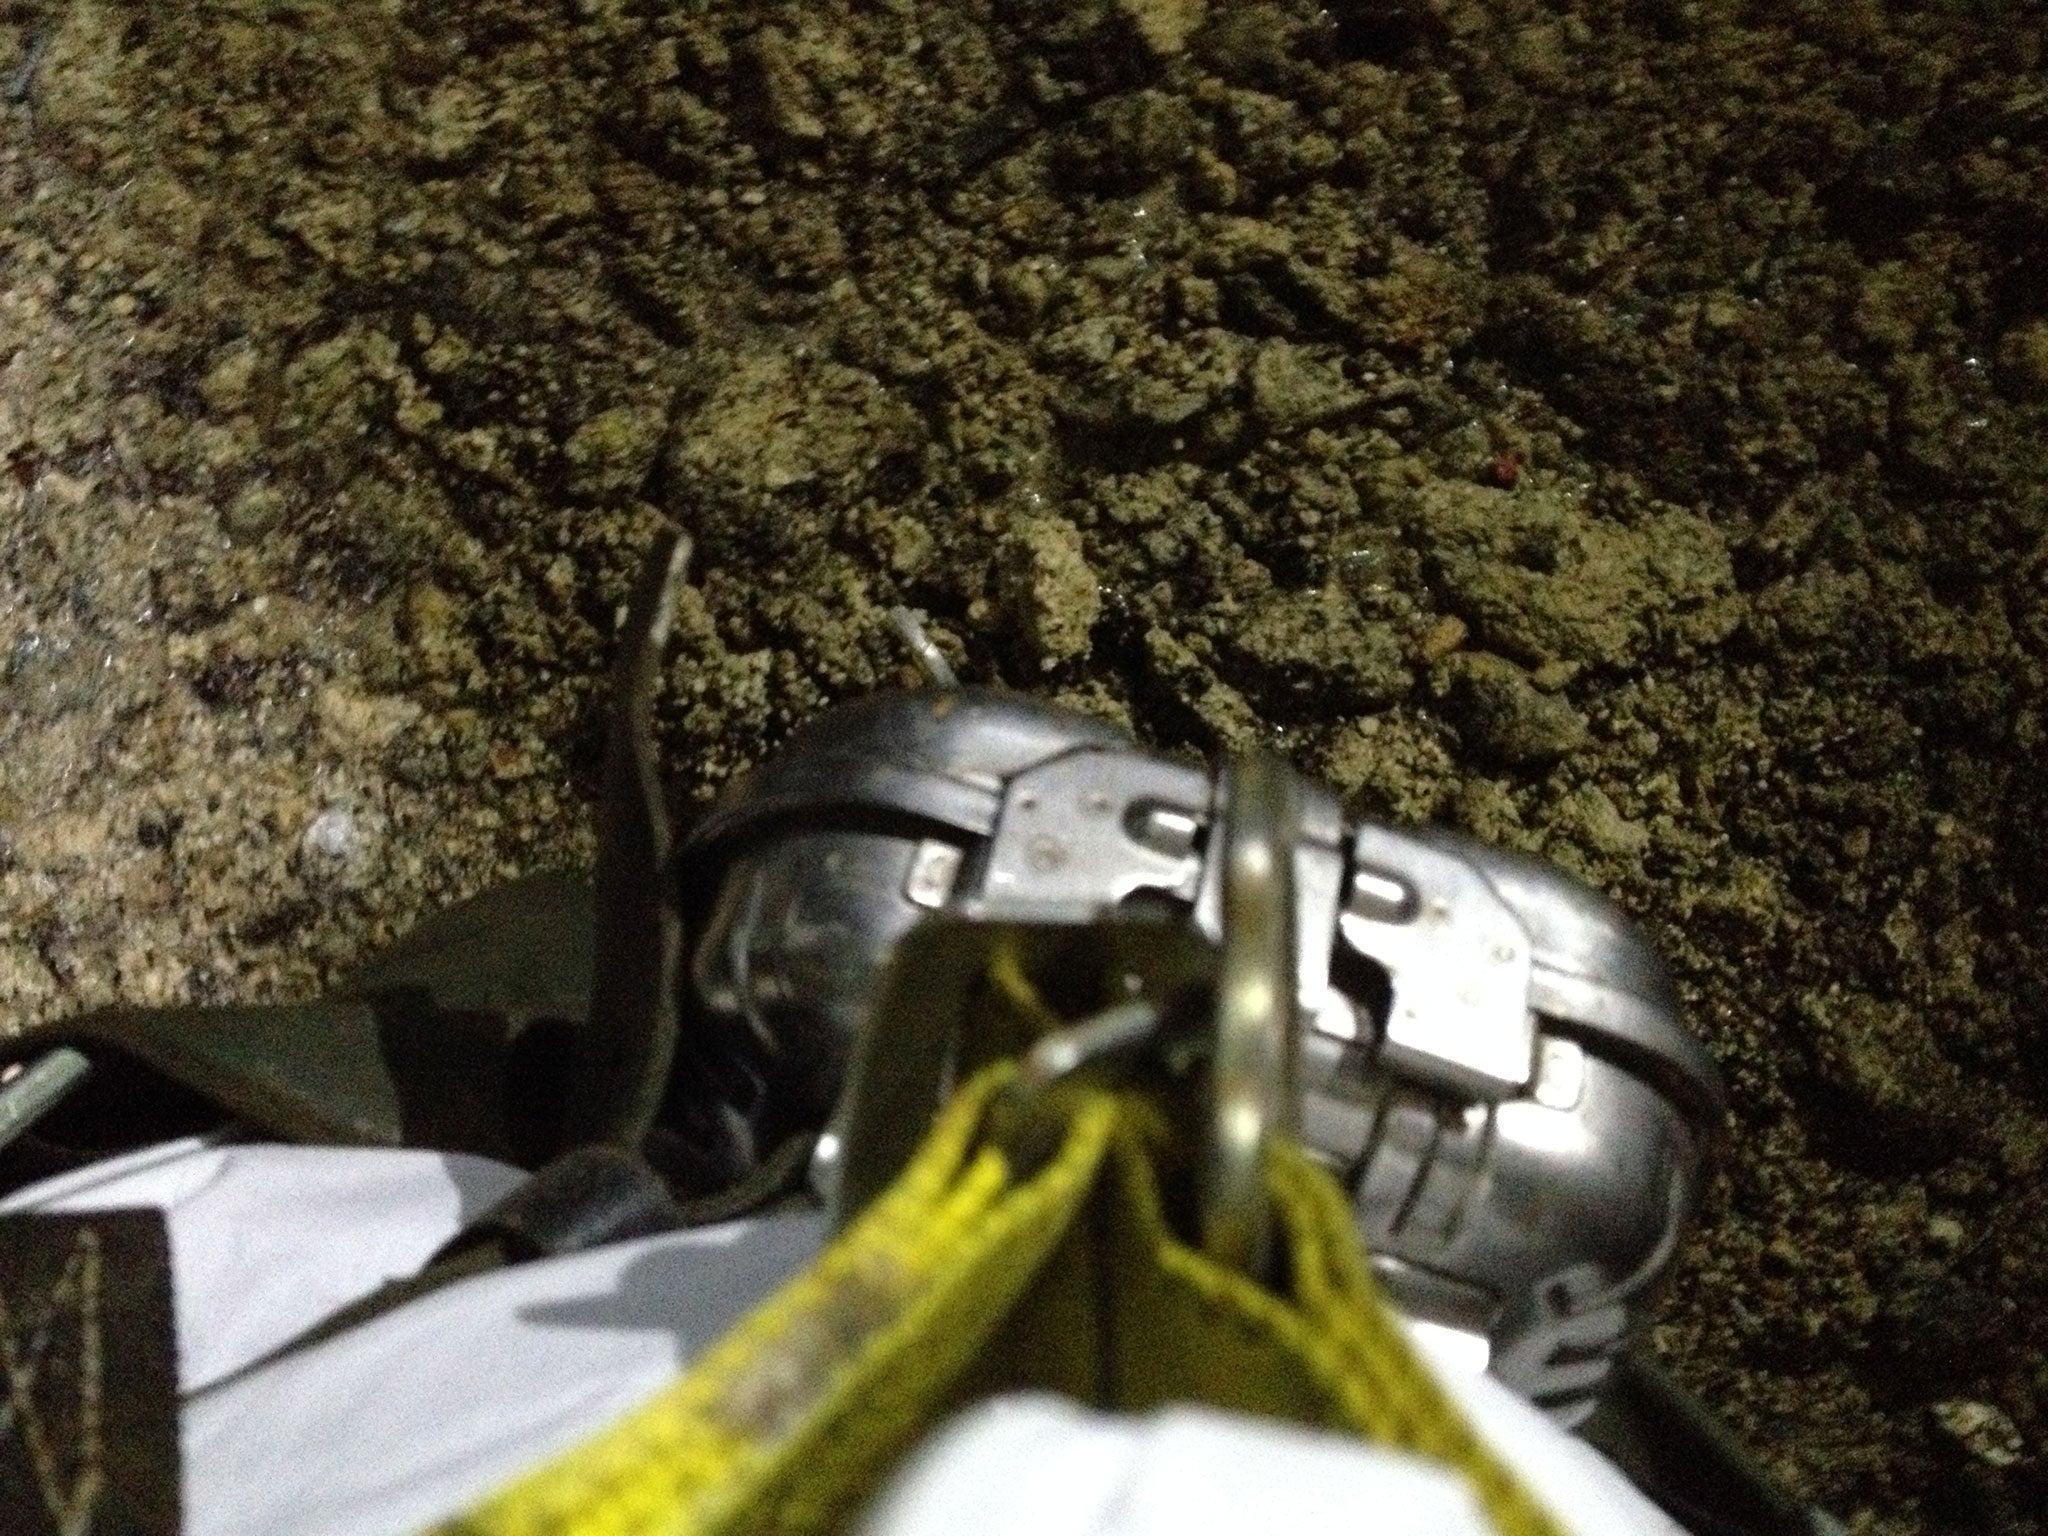 A Thames Water employee took a picture of the fatberg almost up to her waist